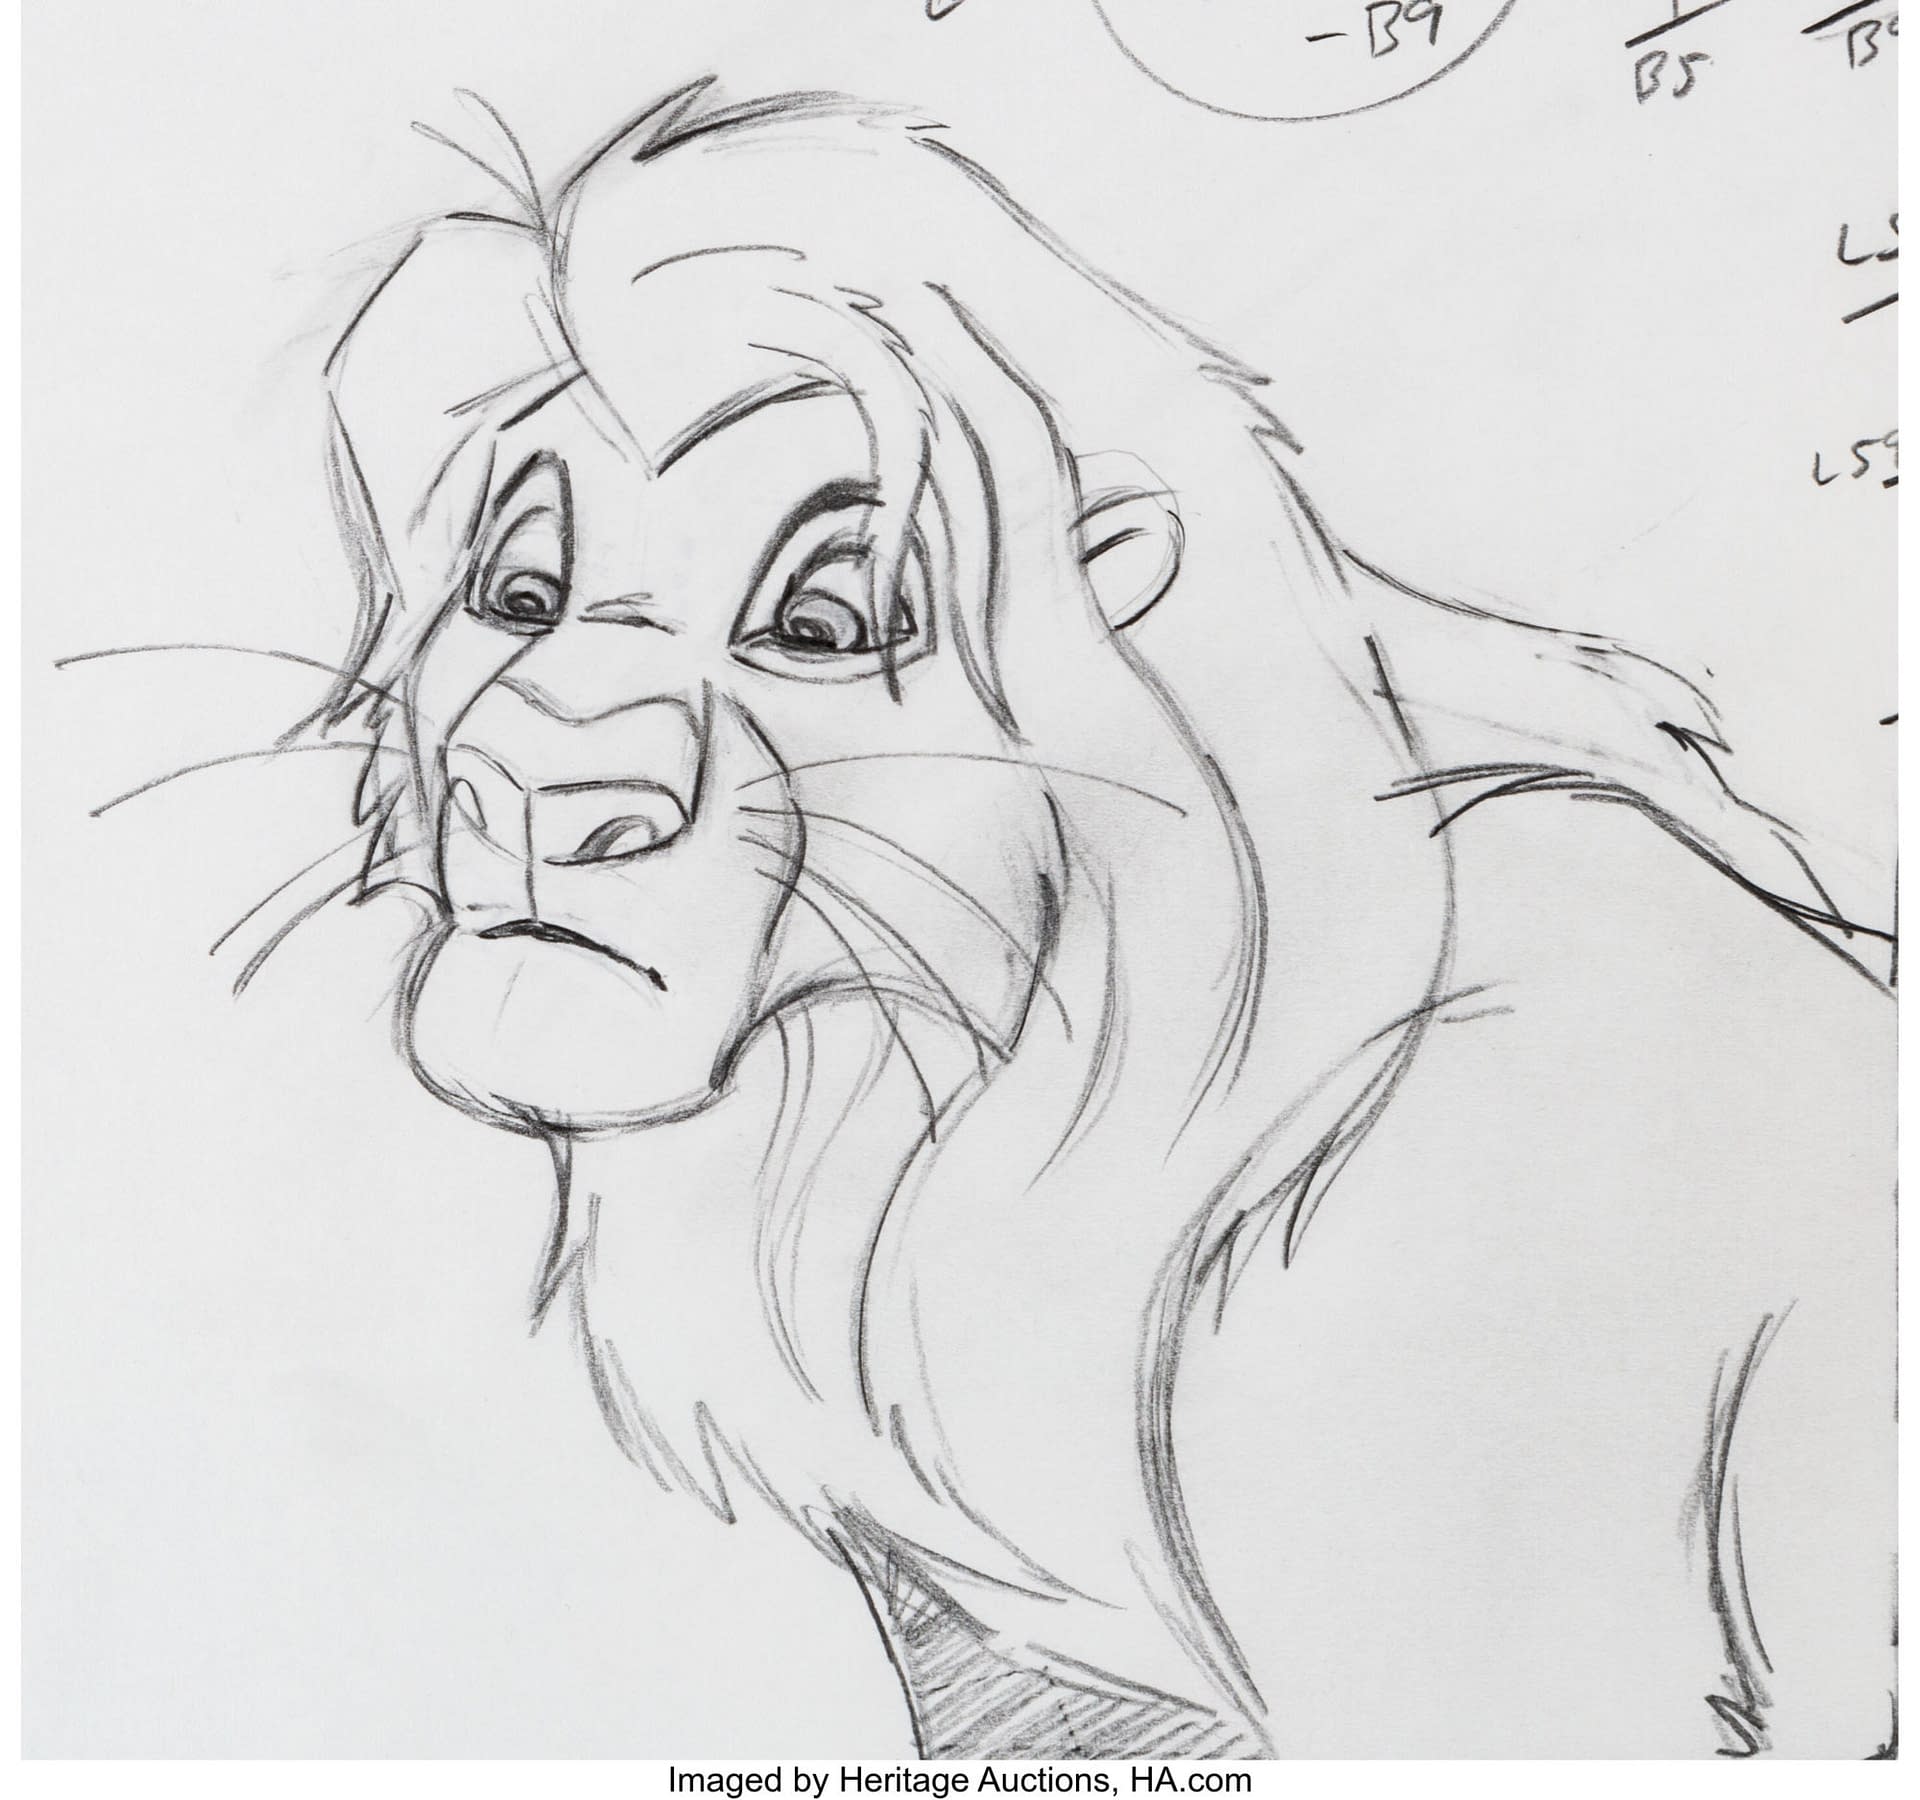 The Lion King II: Simba's Pride Illustration Hits Auction Today